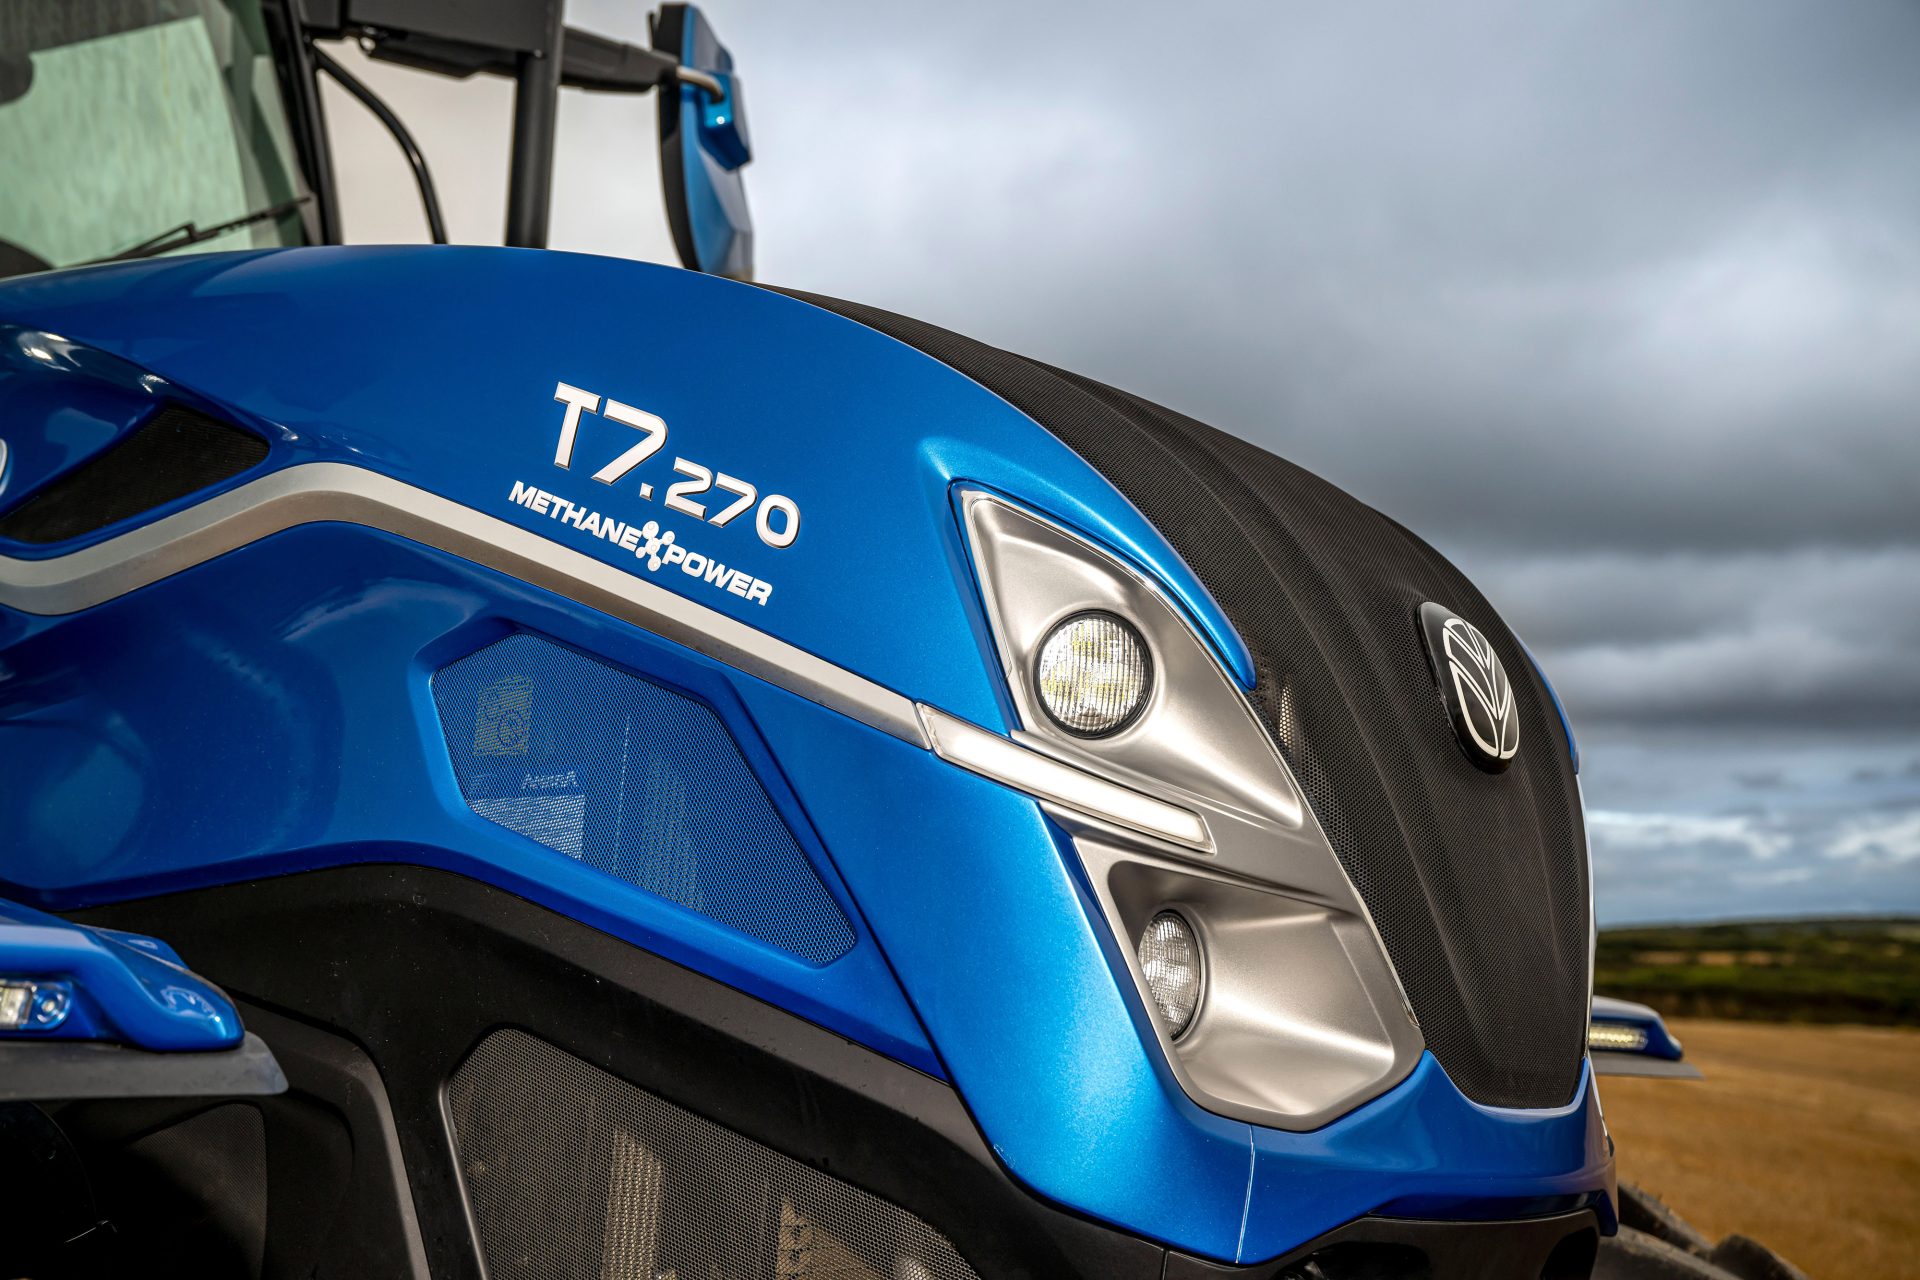 Gas fuelled New Holland T7.270 on sale next year